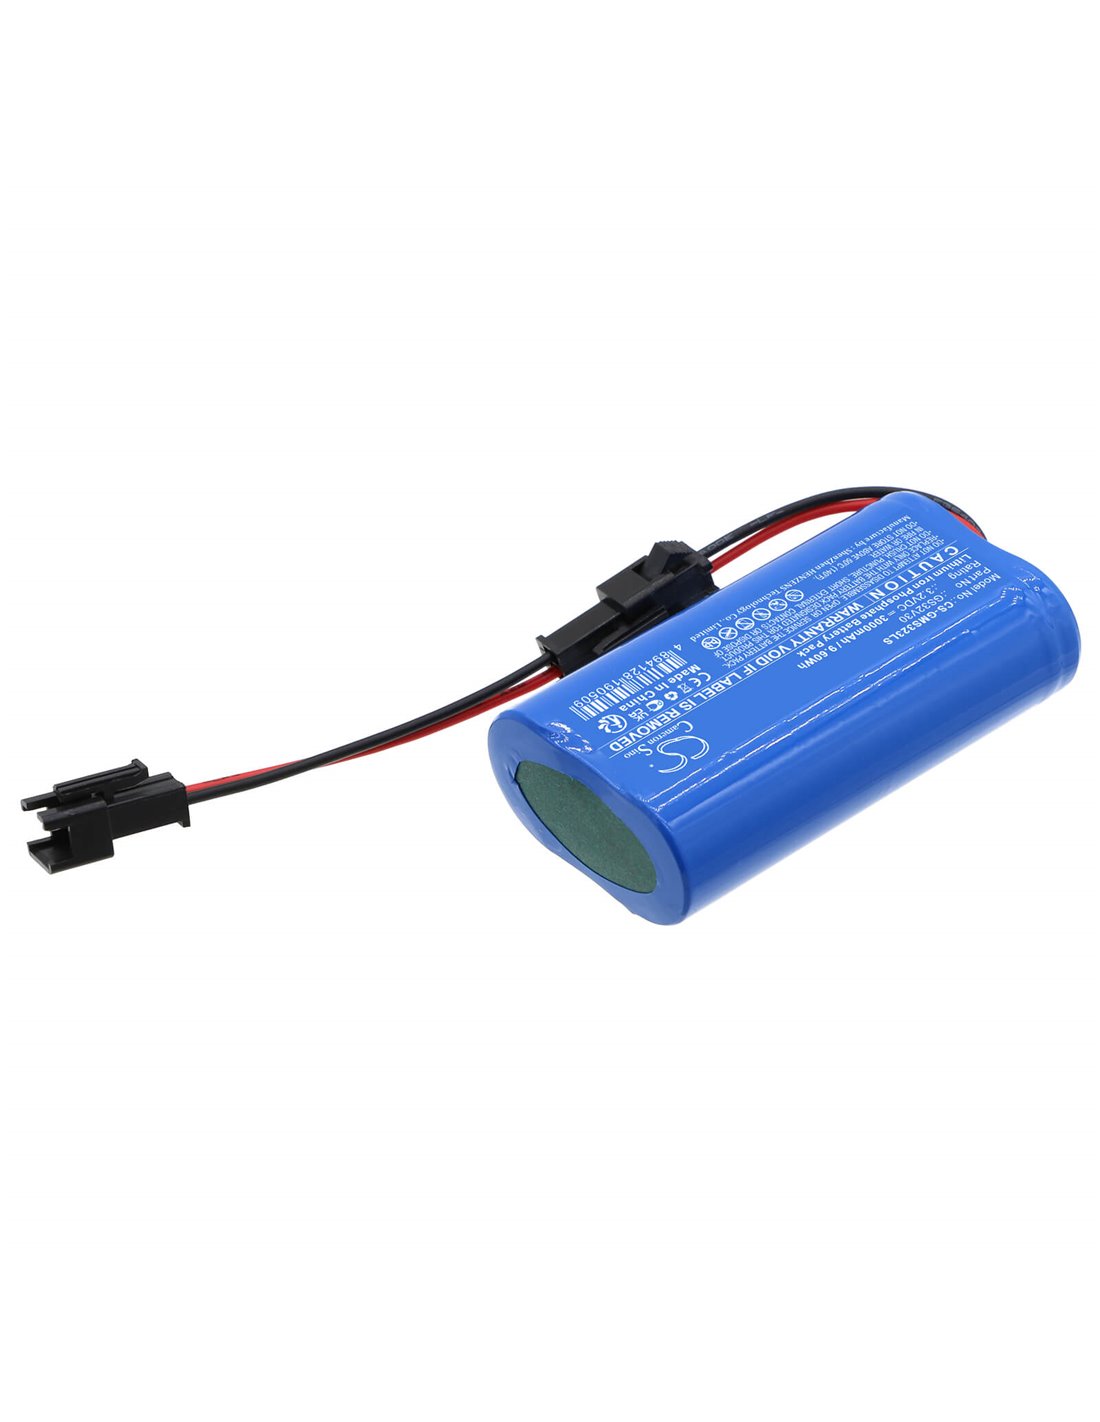 3.2V, LiFePO4, 3000mAh , Battery fits Gama Sonic 97k012, Gs-103, Gs-104, 9.60Wh